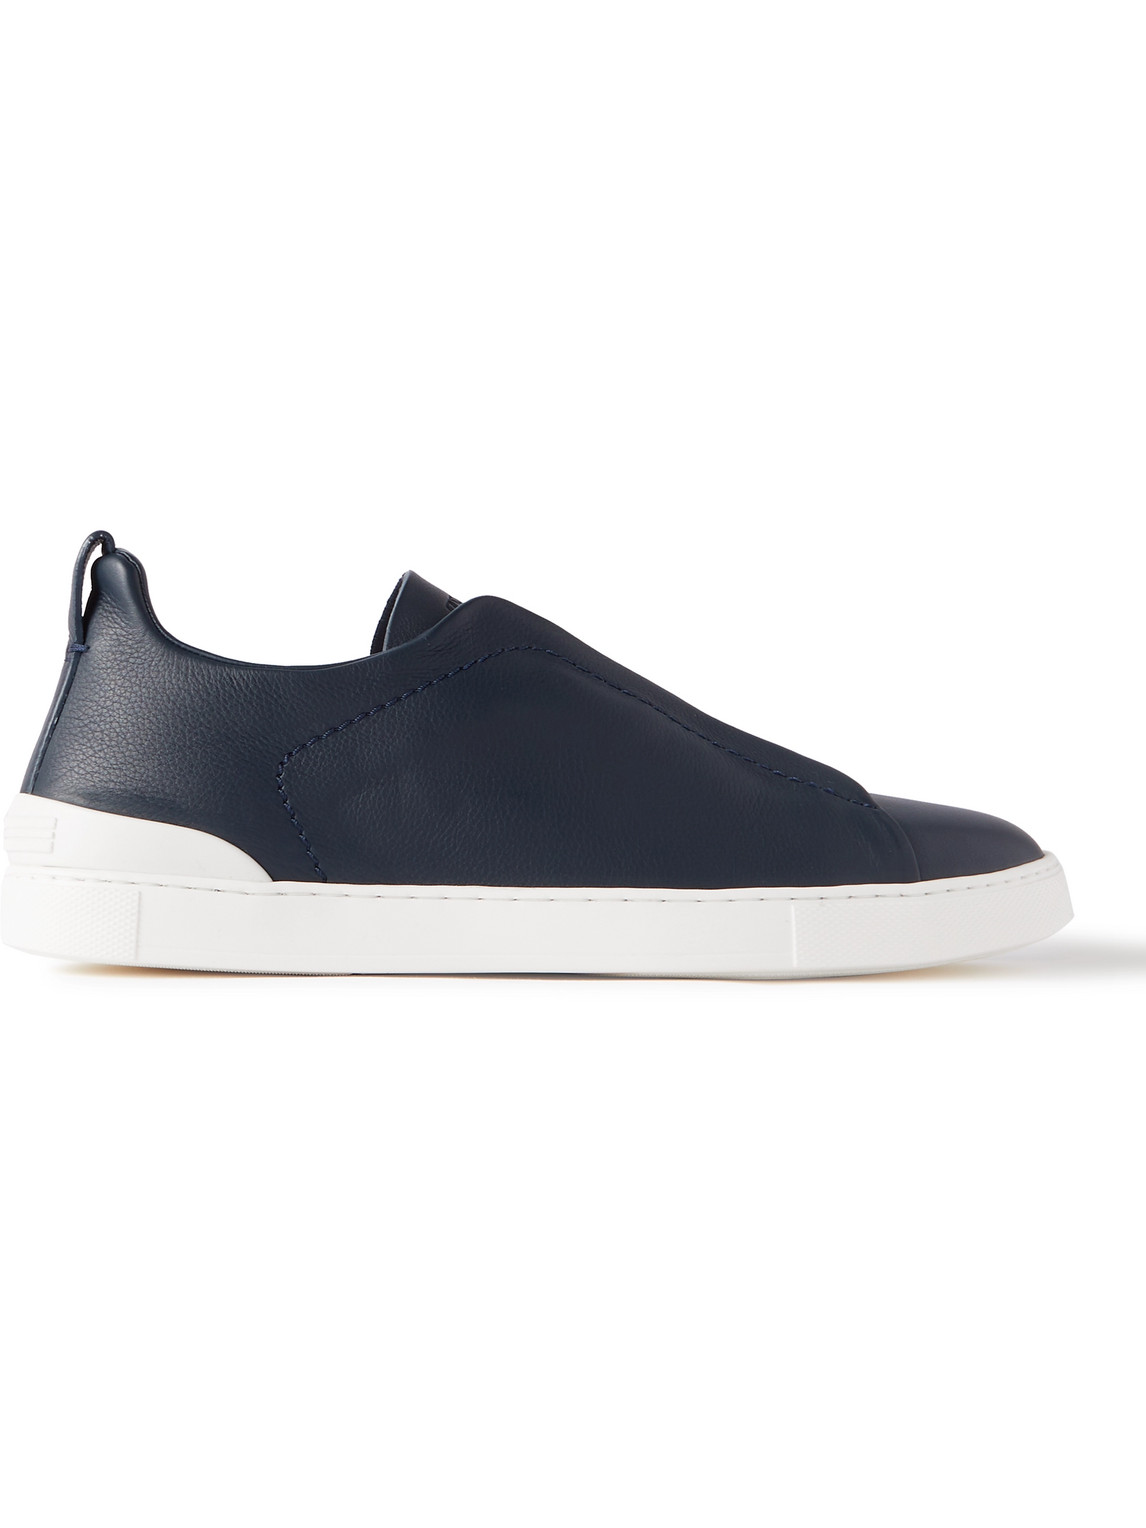 Zegna Triple Stitch Leather Sneakers In Blue